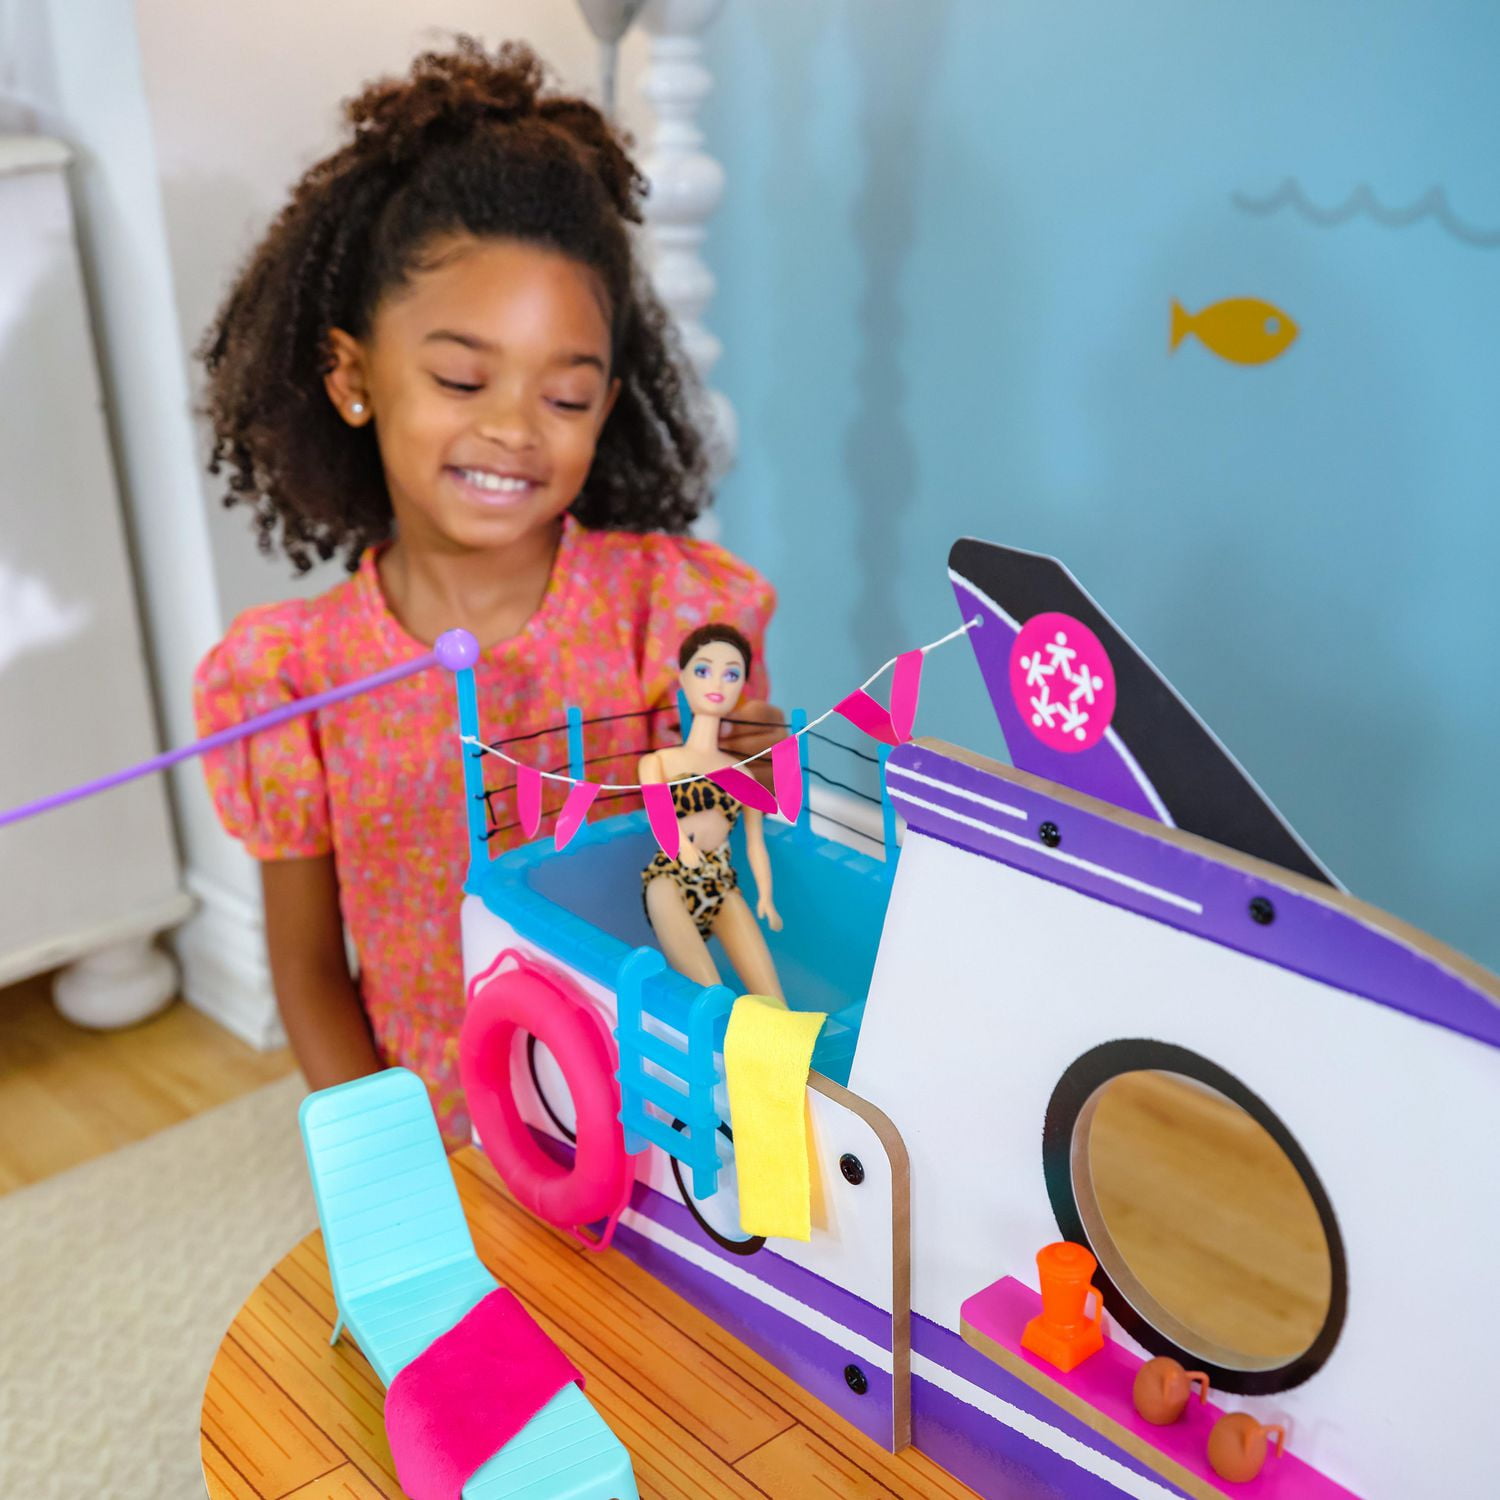 KidKraft Luxe Life 2-in-1 Wooden Cruise Ship & Island Play Set